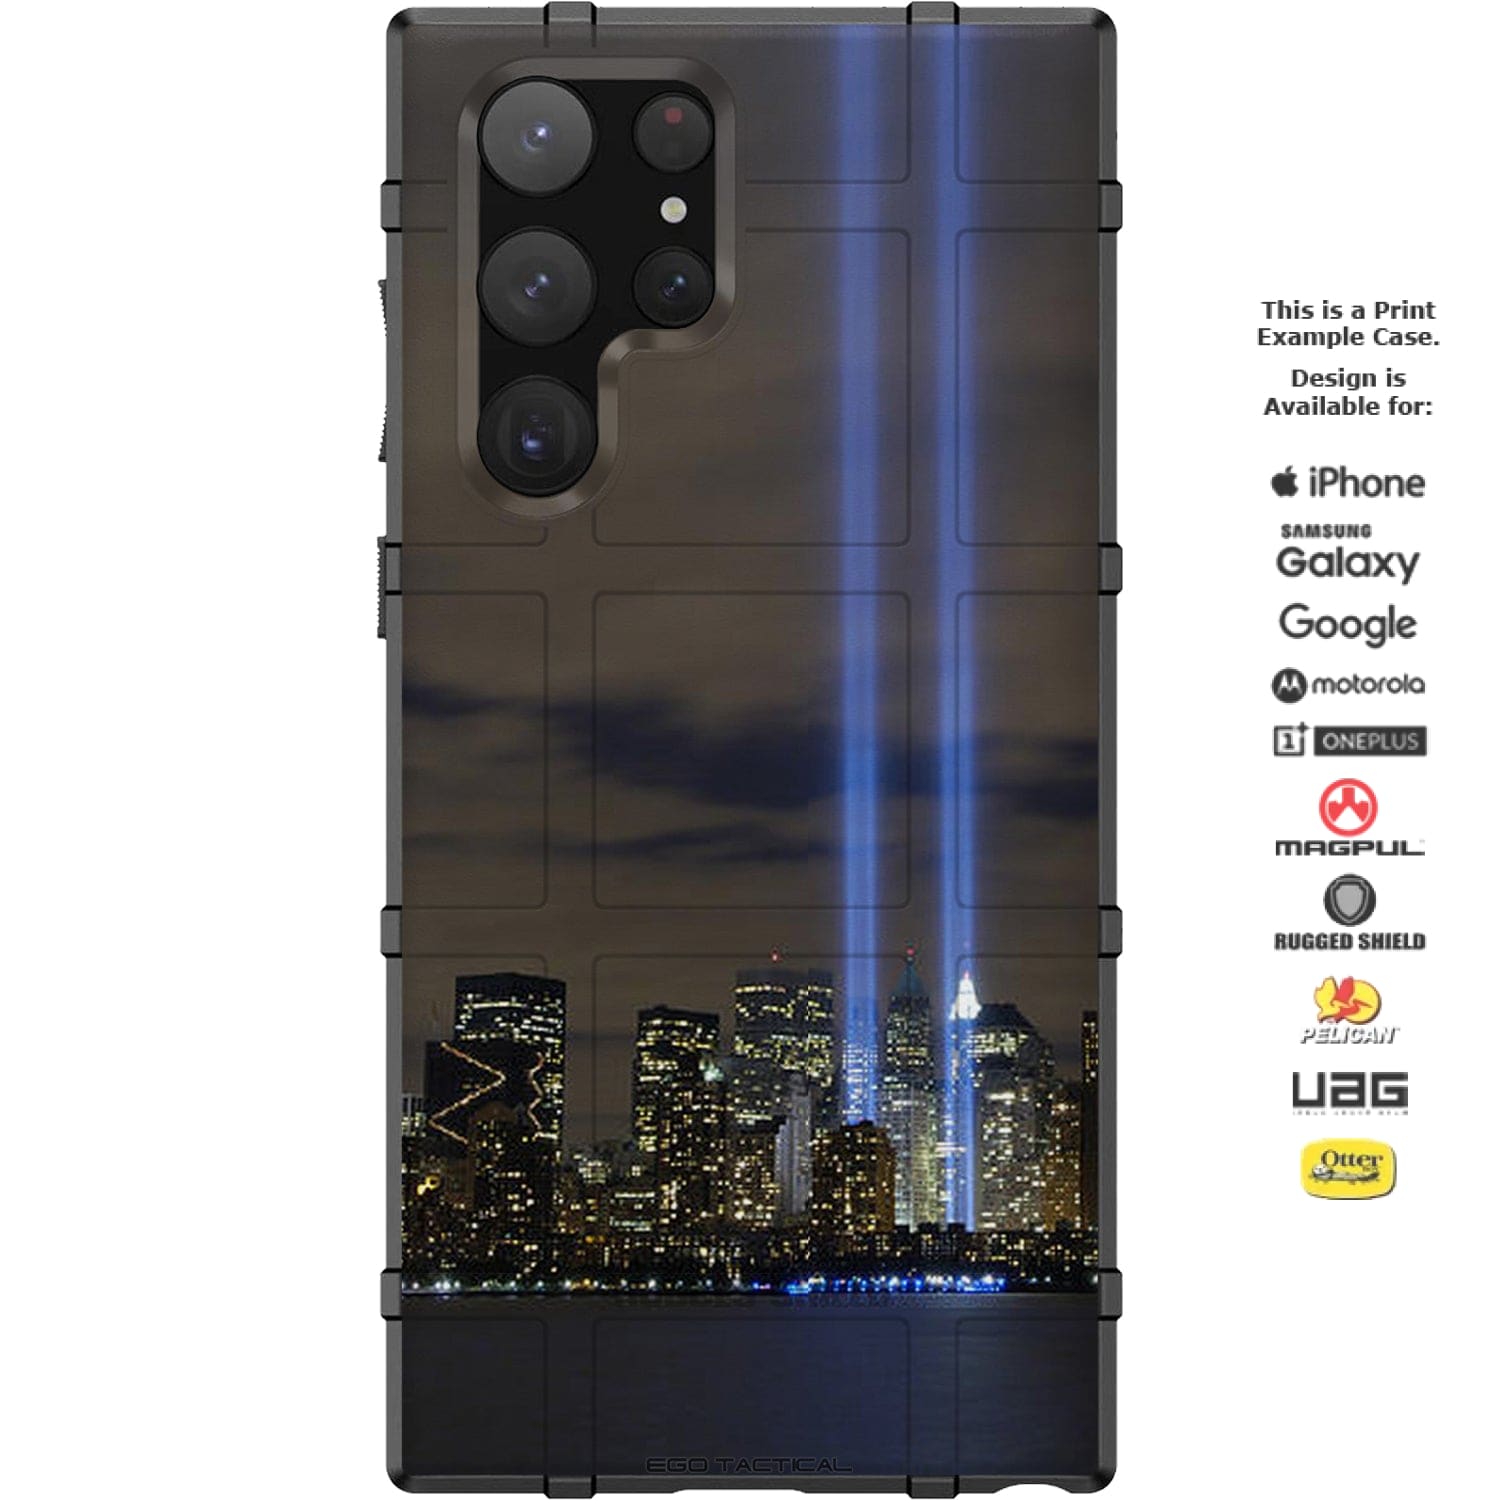 911 Twin Towers Remembrance Printed Android & Apple Phone Case Design